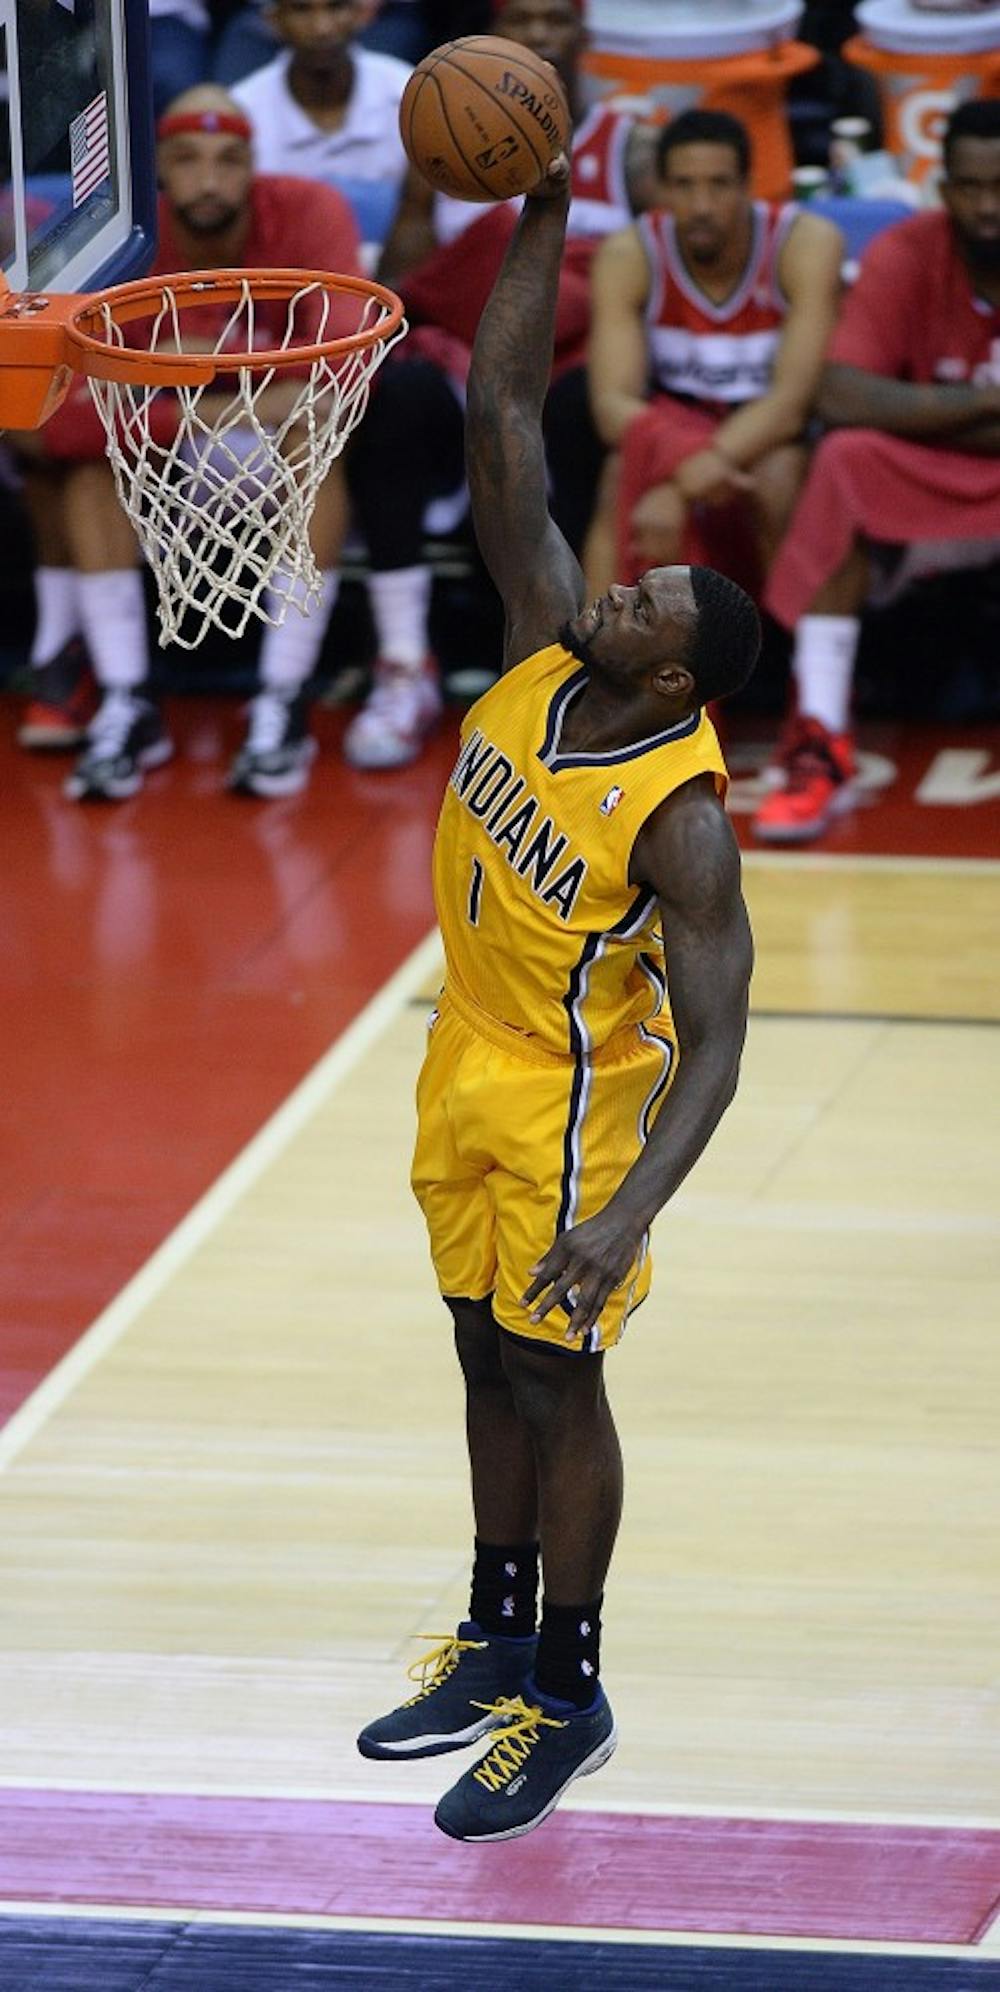 Indiana Pacers guard Lance Stephenson slam dunks against the Washington Wizards May 15. Stephenson is leaving the Pacers for the Charlotte Hornets. MCT PHOTO